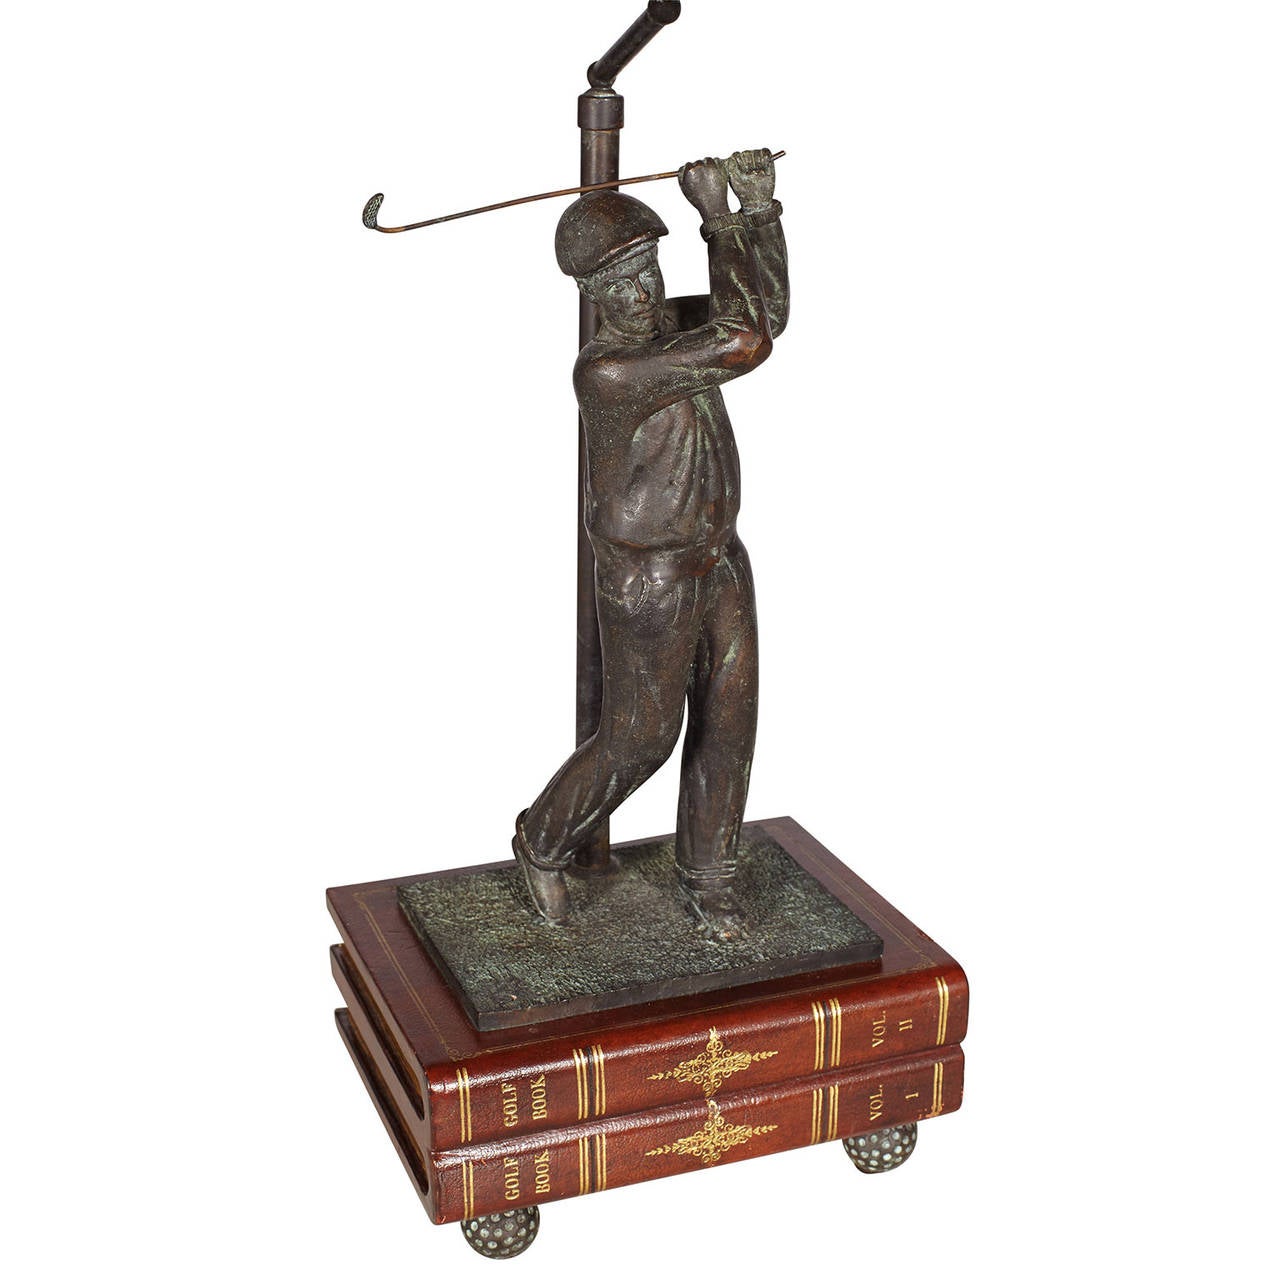 Bronze lamp featuring a man golfing, base of marble and wood, with finial and bronze feet in the form of golf balls. By Maitland Smith. Linen Shade.